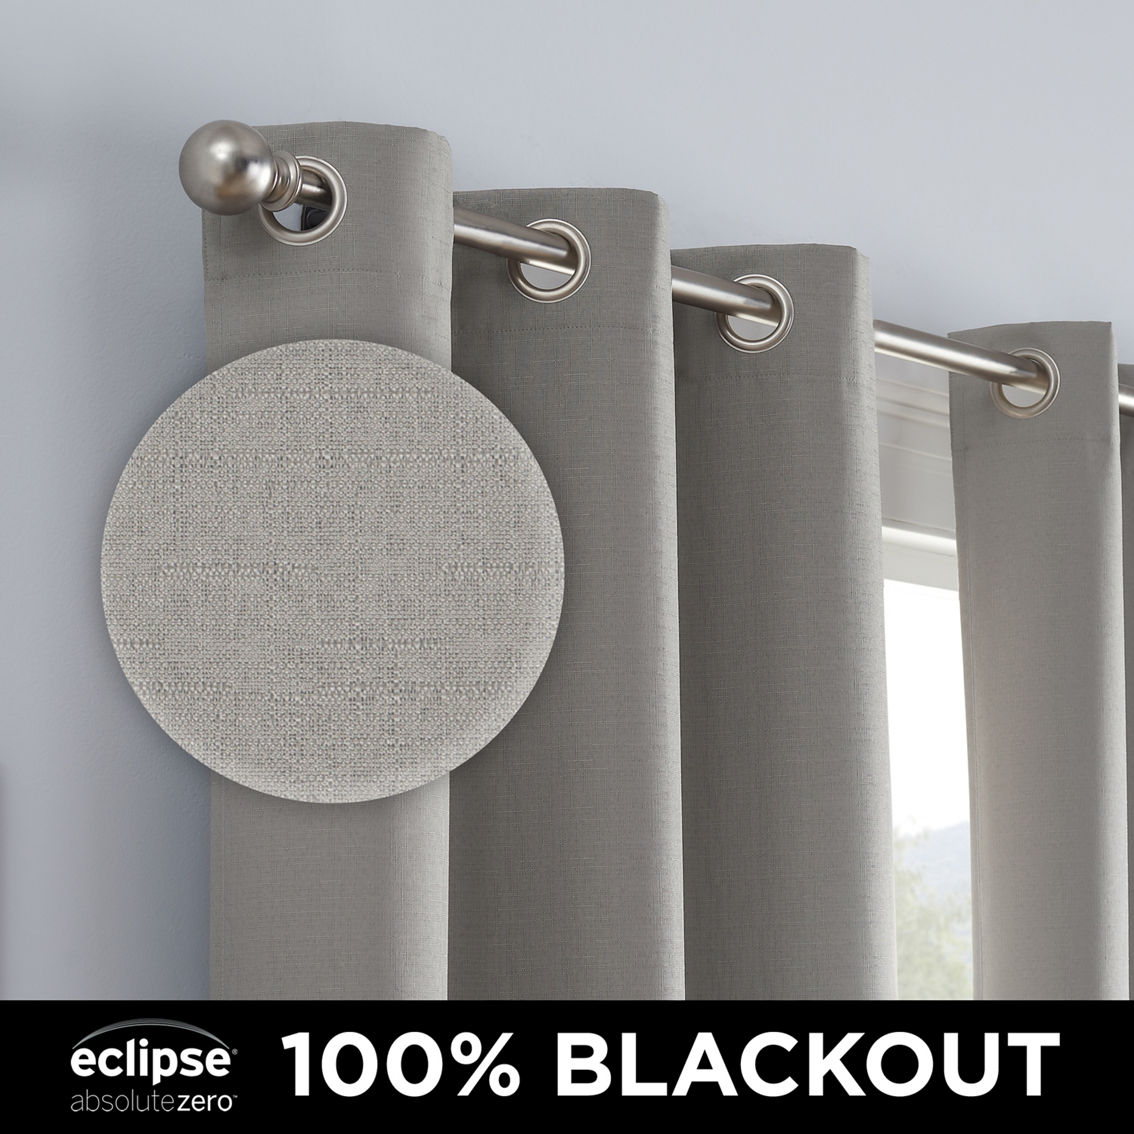 Eclipse Absolute Zero Harper Absolute Zero Blackout Curtain Panel - Image 8 of 9